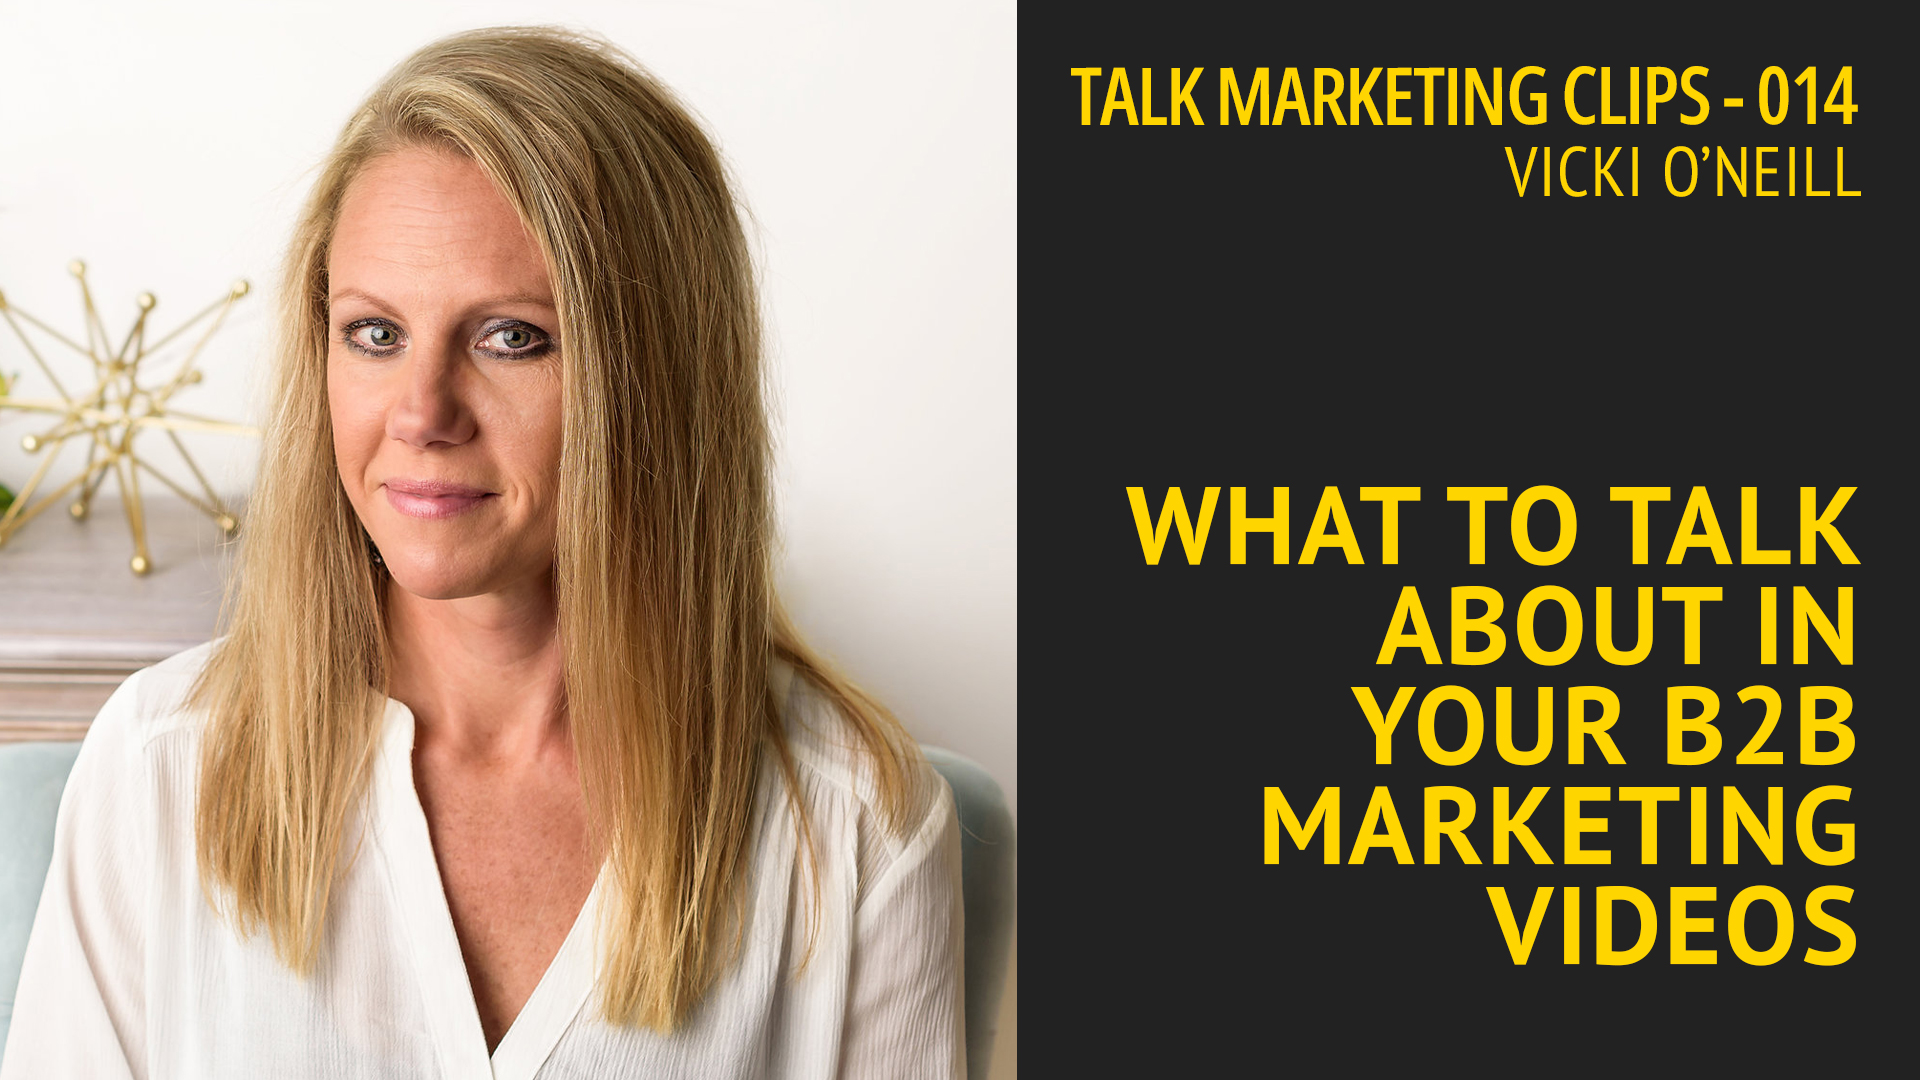 What to talk about in your B2B marketing videos – Effective Marketing Clips 014